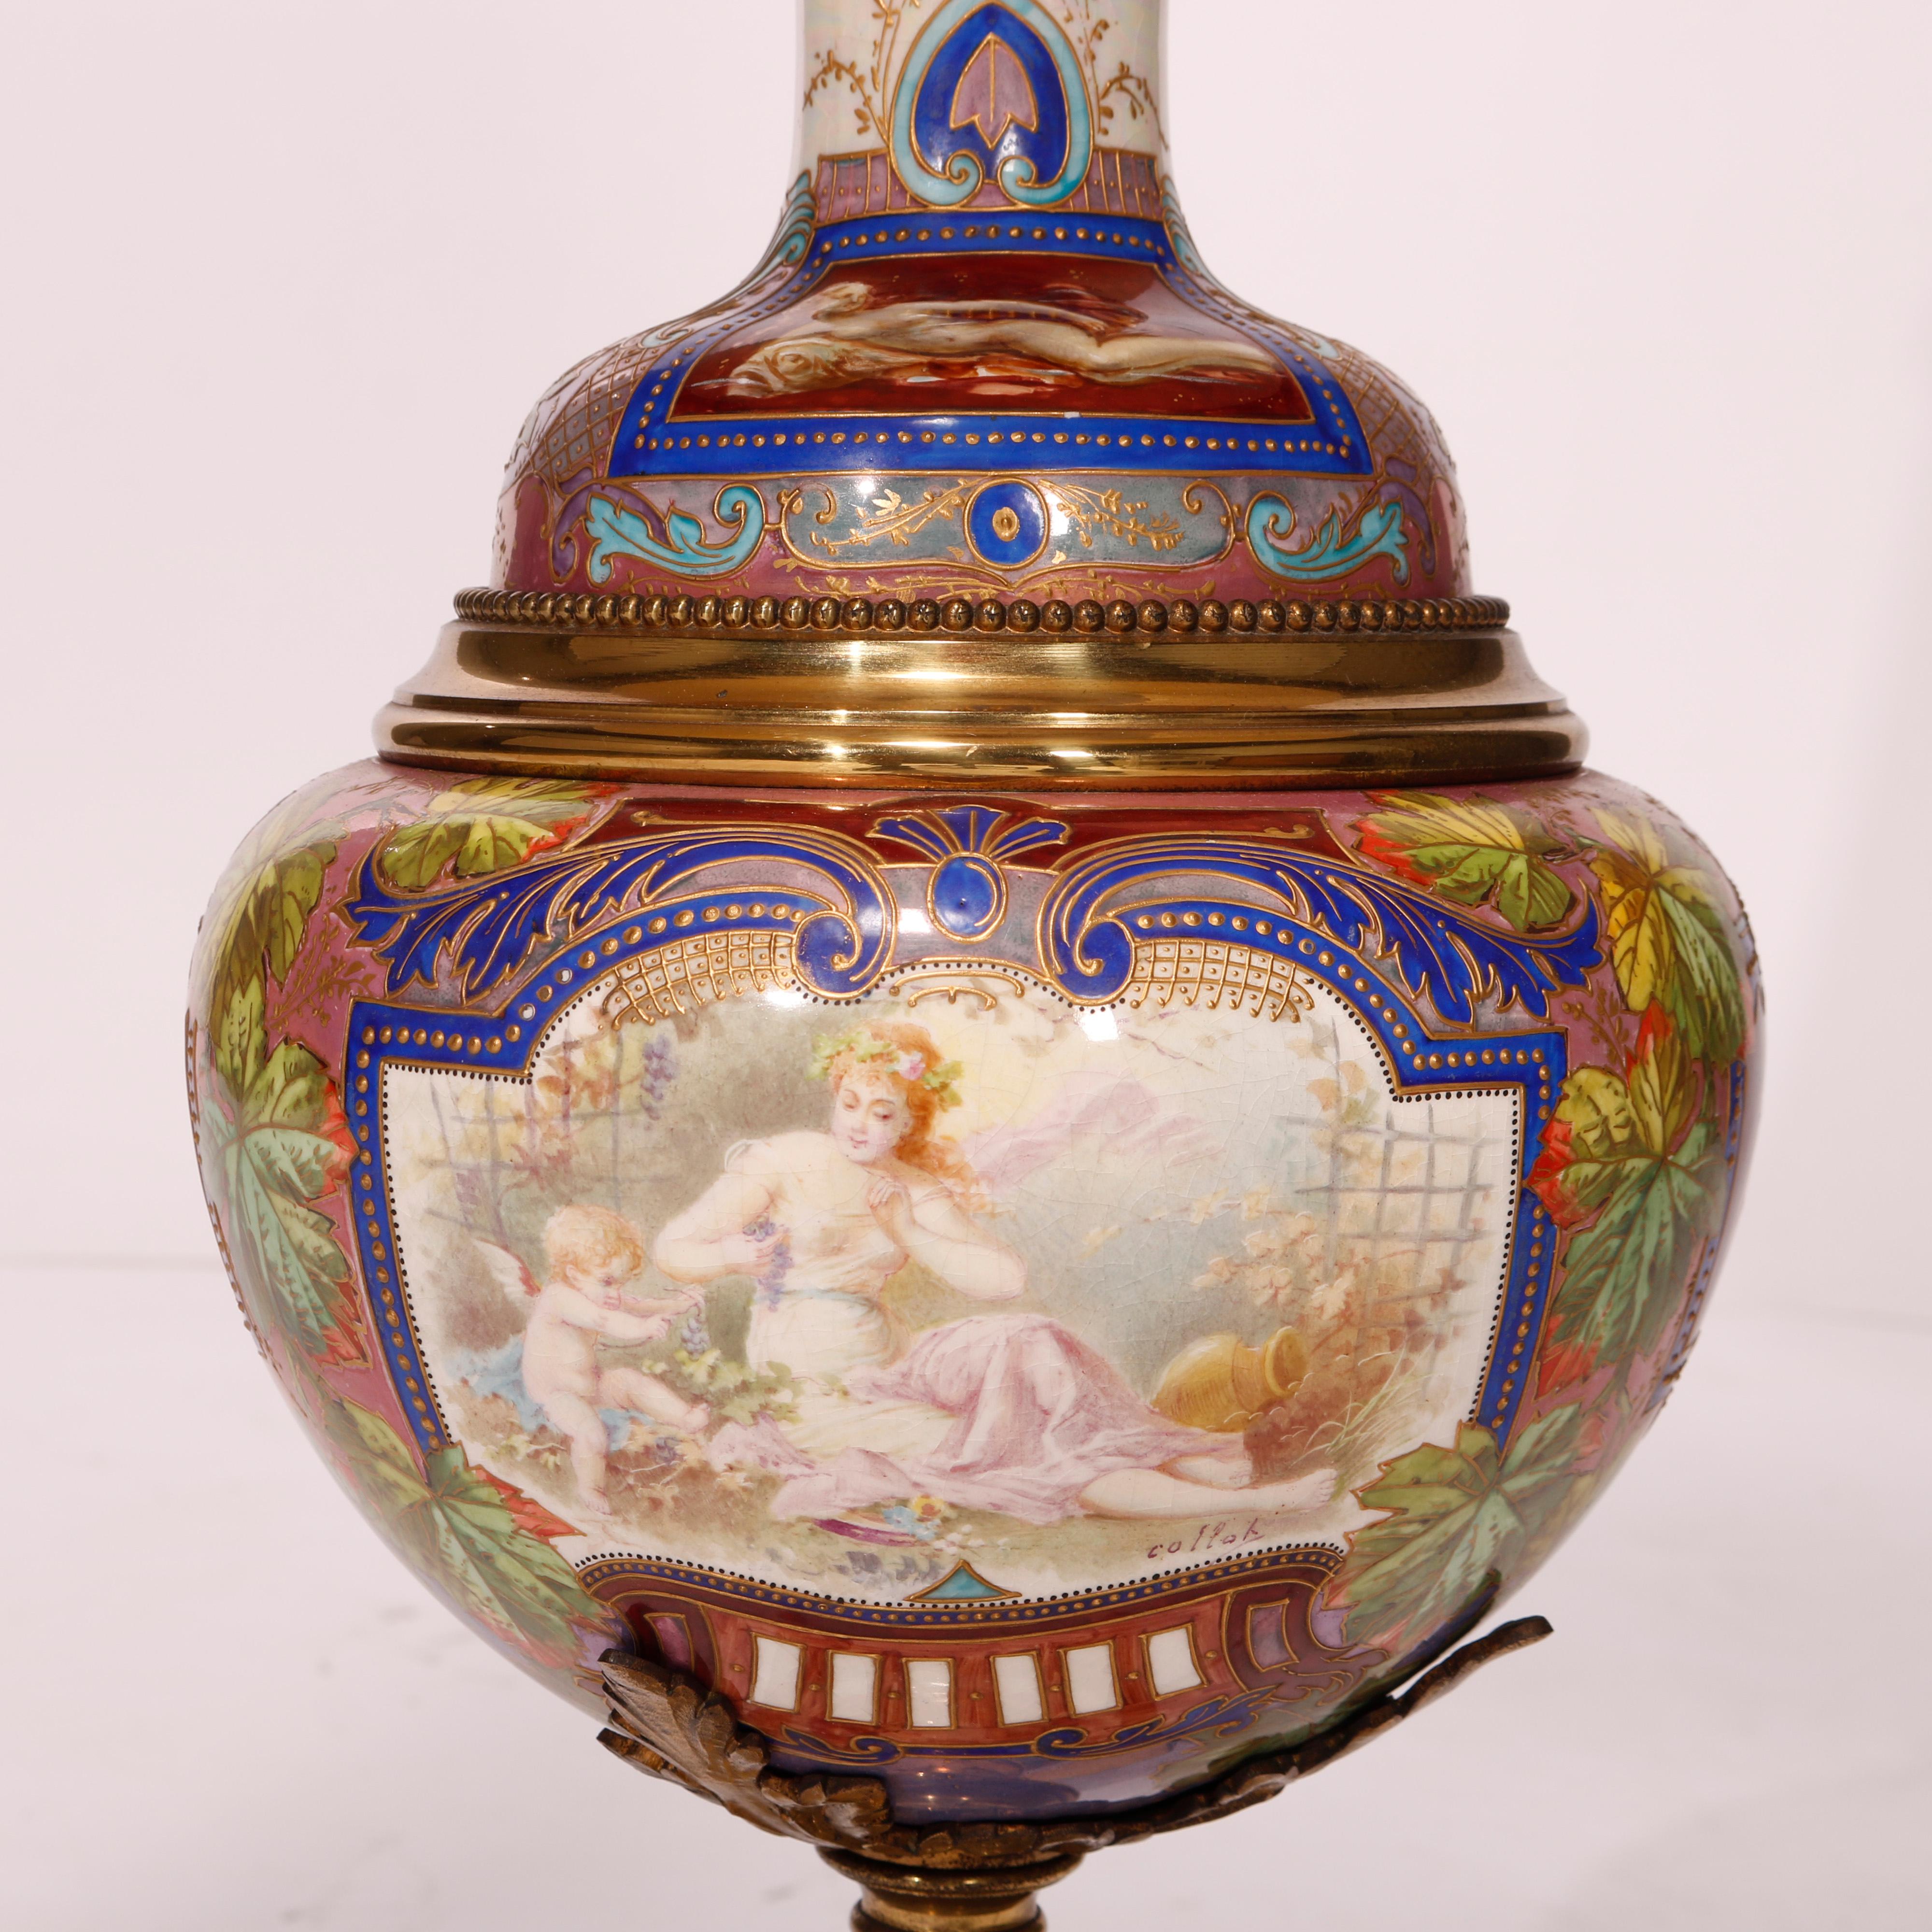 Enameled Antique Oversized Royal Vienna Porcelain Lamp with Classical Scenes & Putti 1880